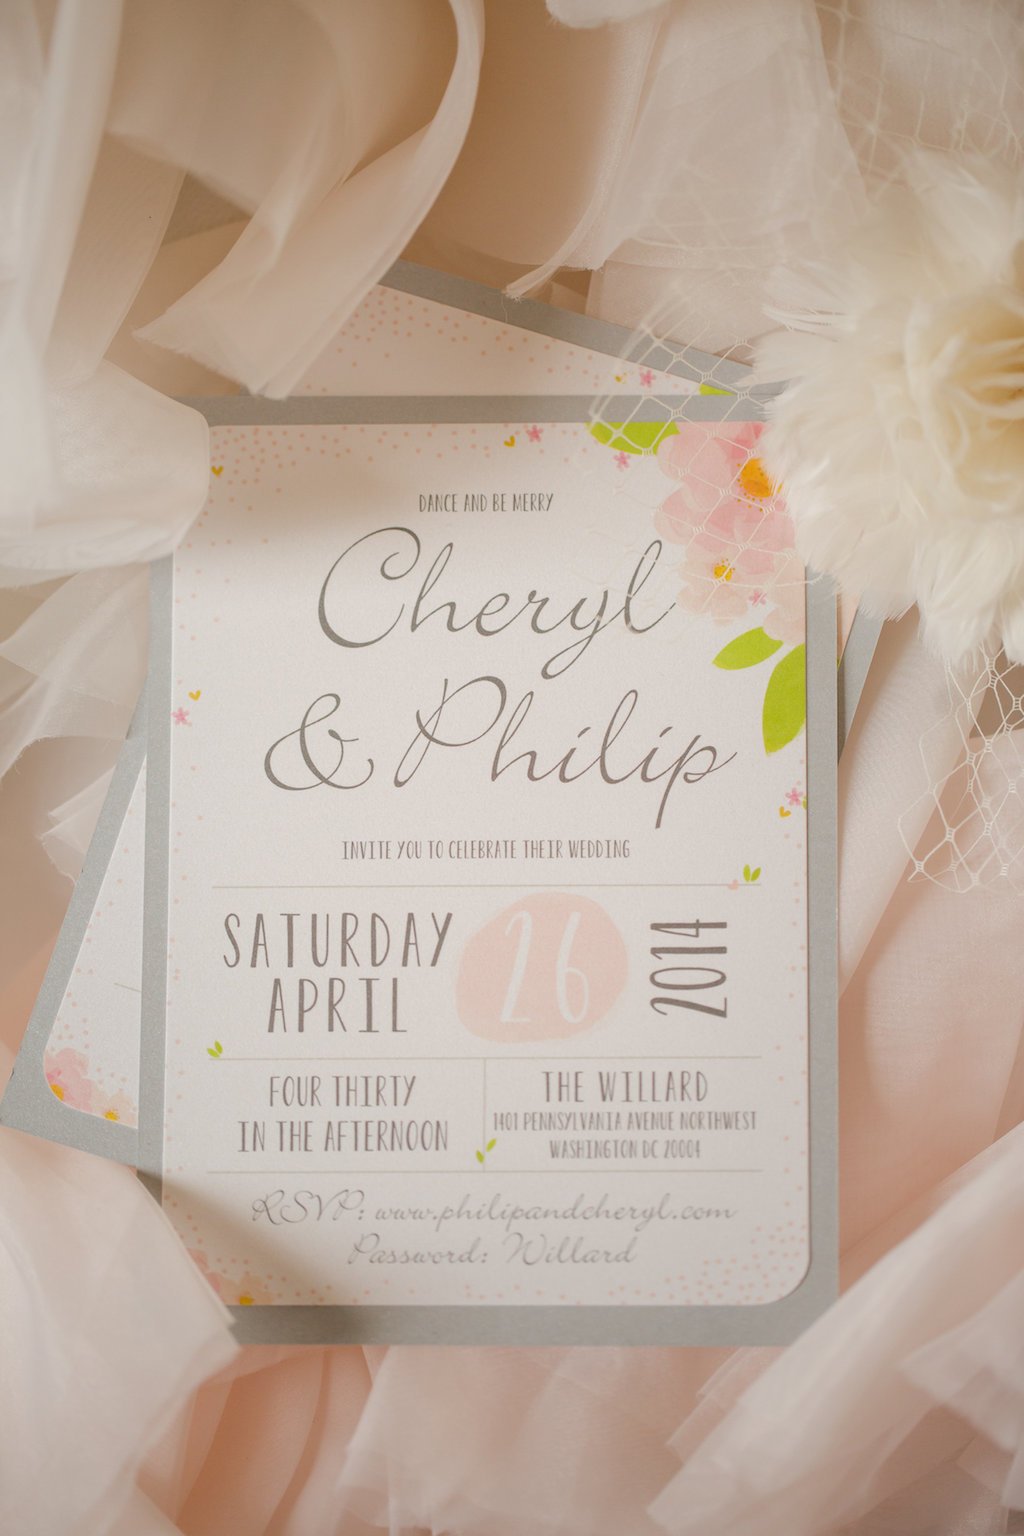 View More: http://katelynjames.pass.us/philip-and-cheryl-wedding